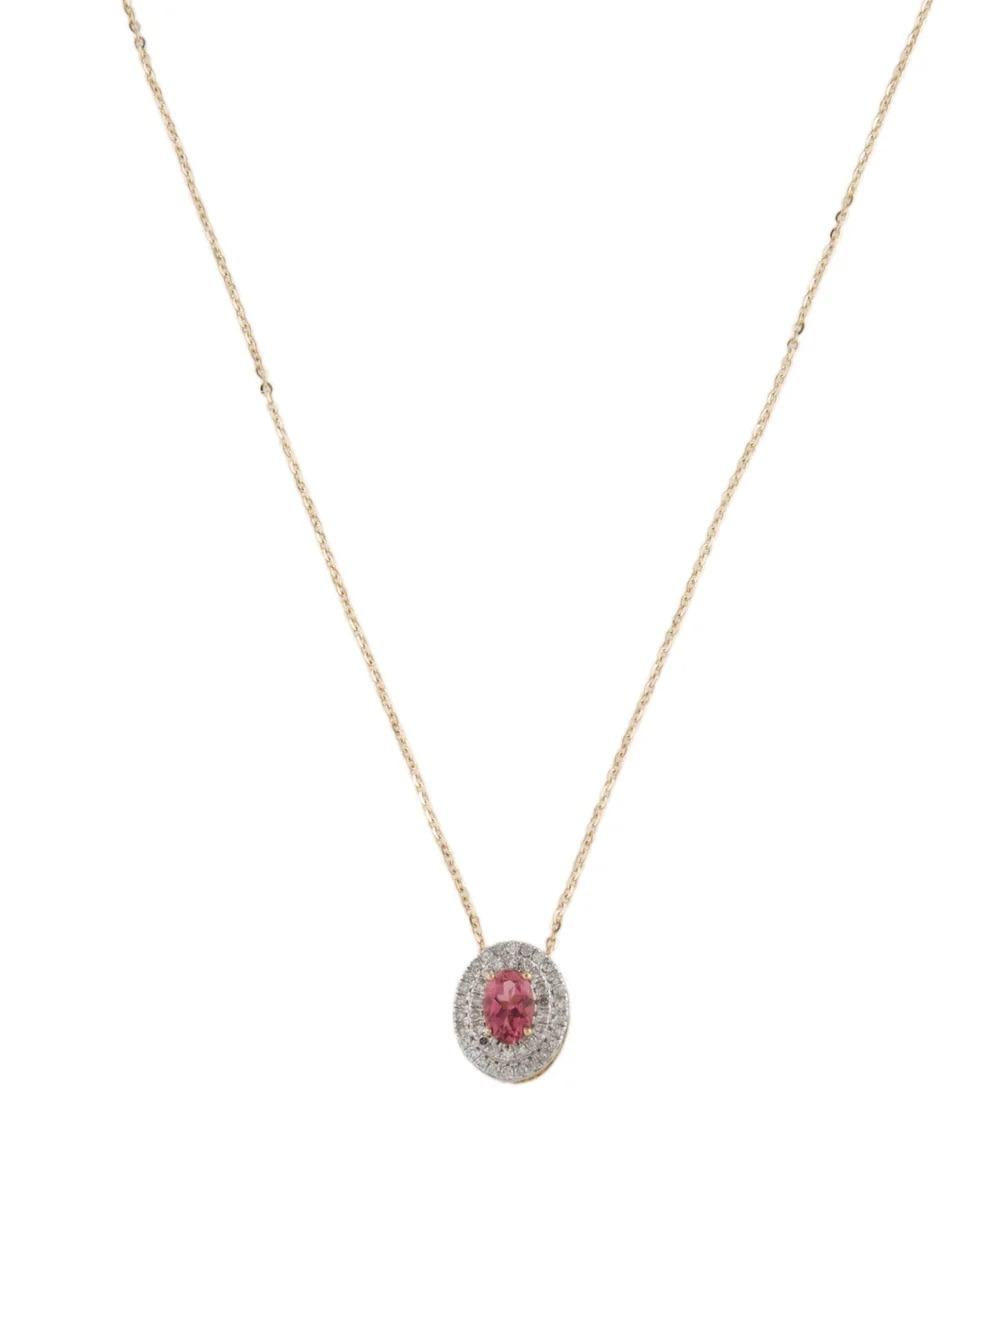 Experience elegance and sophistication with our Rhodium-Plated & 14K Yellow Gold Pendant Necklace, featuring a stunning 0.42 Carat Oval Modified Brilliant Tourmaline. Crafted with meticulous attention to detail, this exquisite piece is sure to